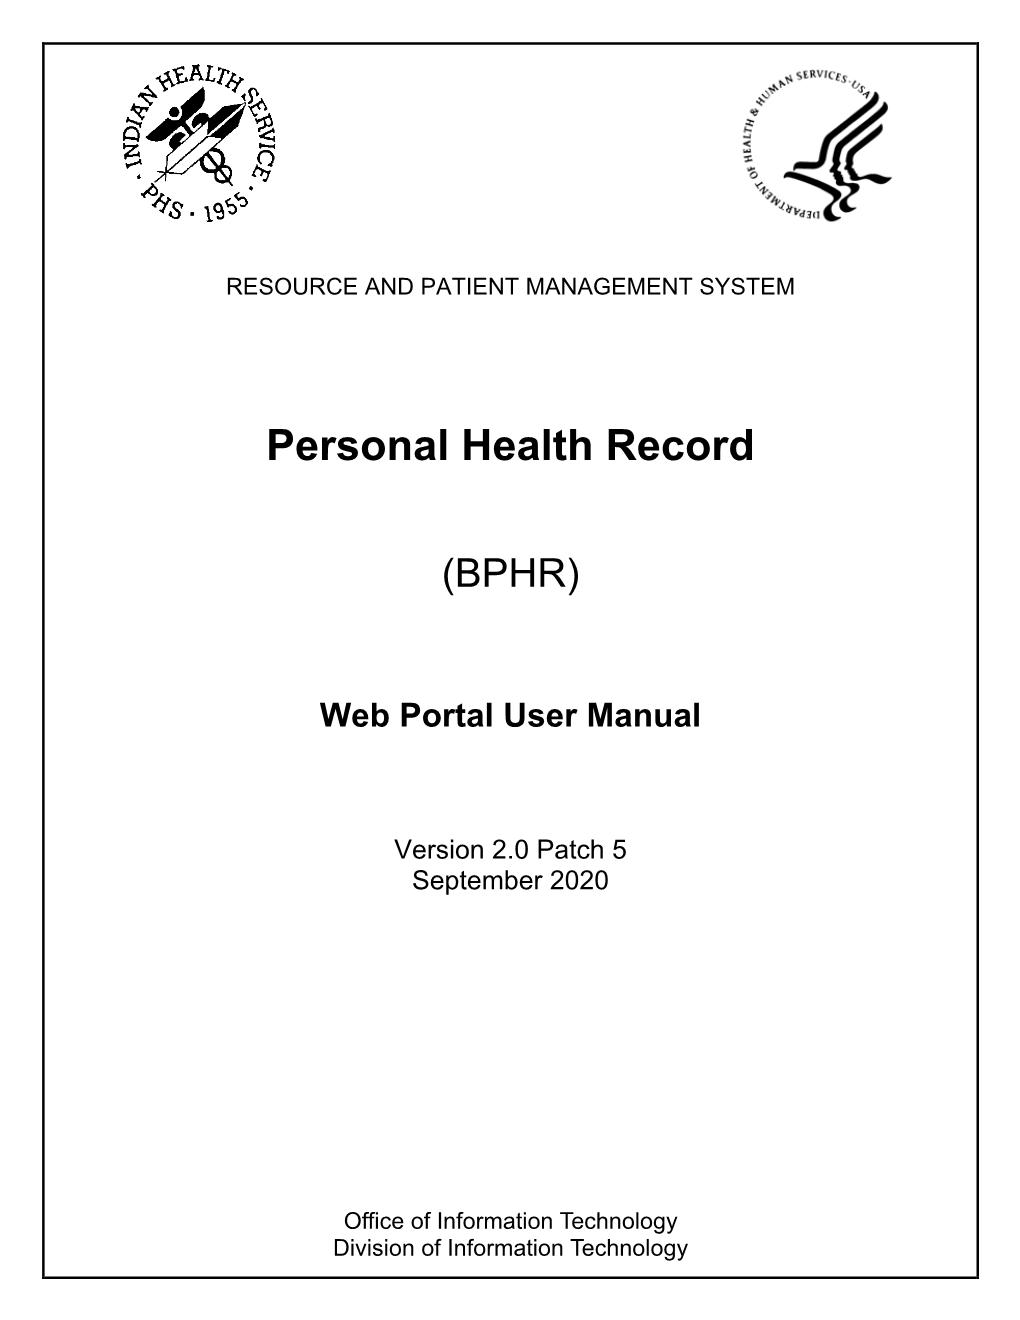 Personal Health Record (BPHR) Version 2.0 Patch 5